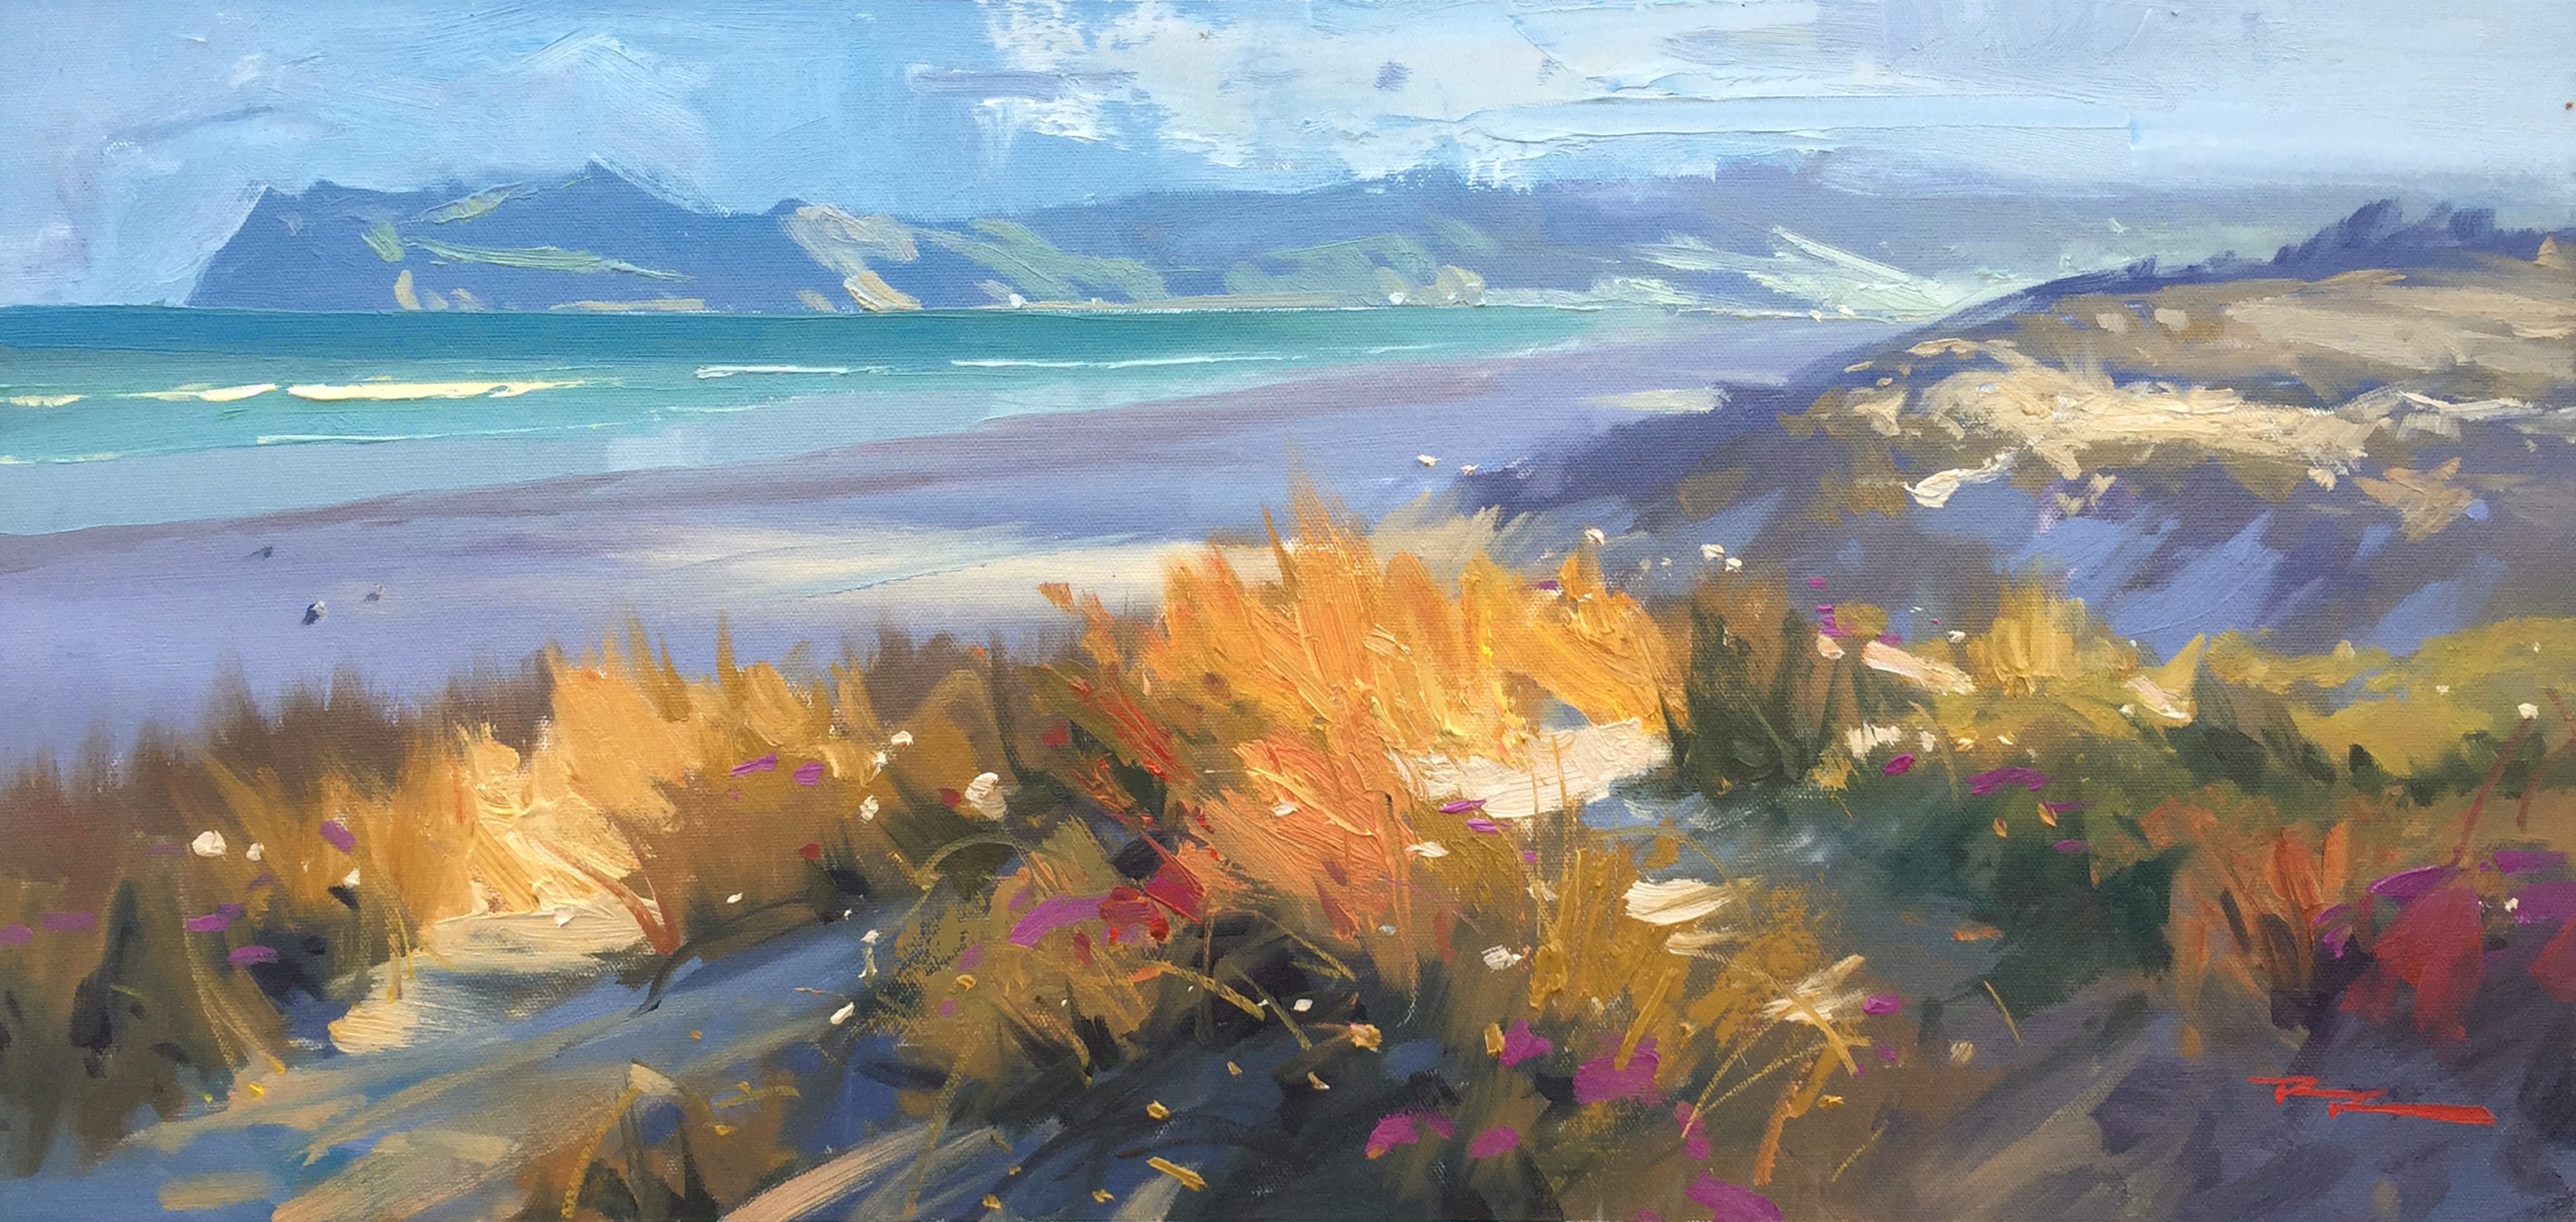 Painting Details in Dune Grasses